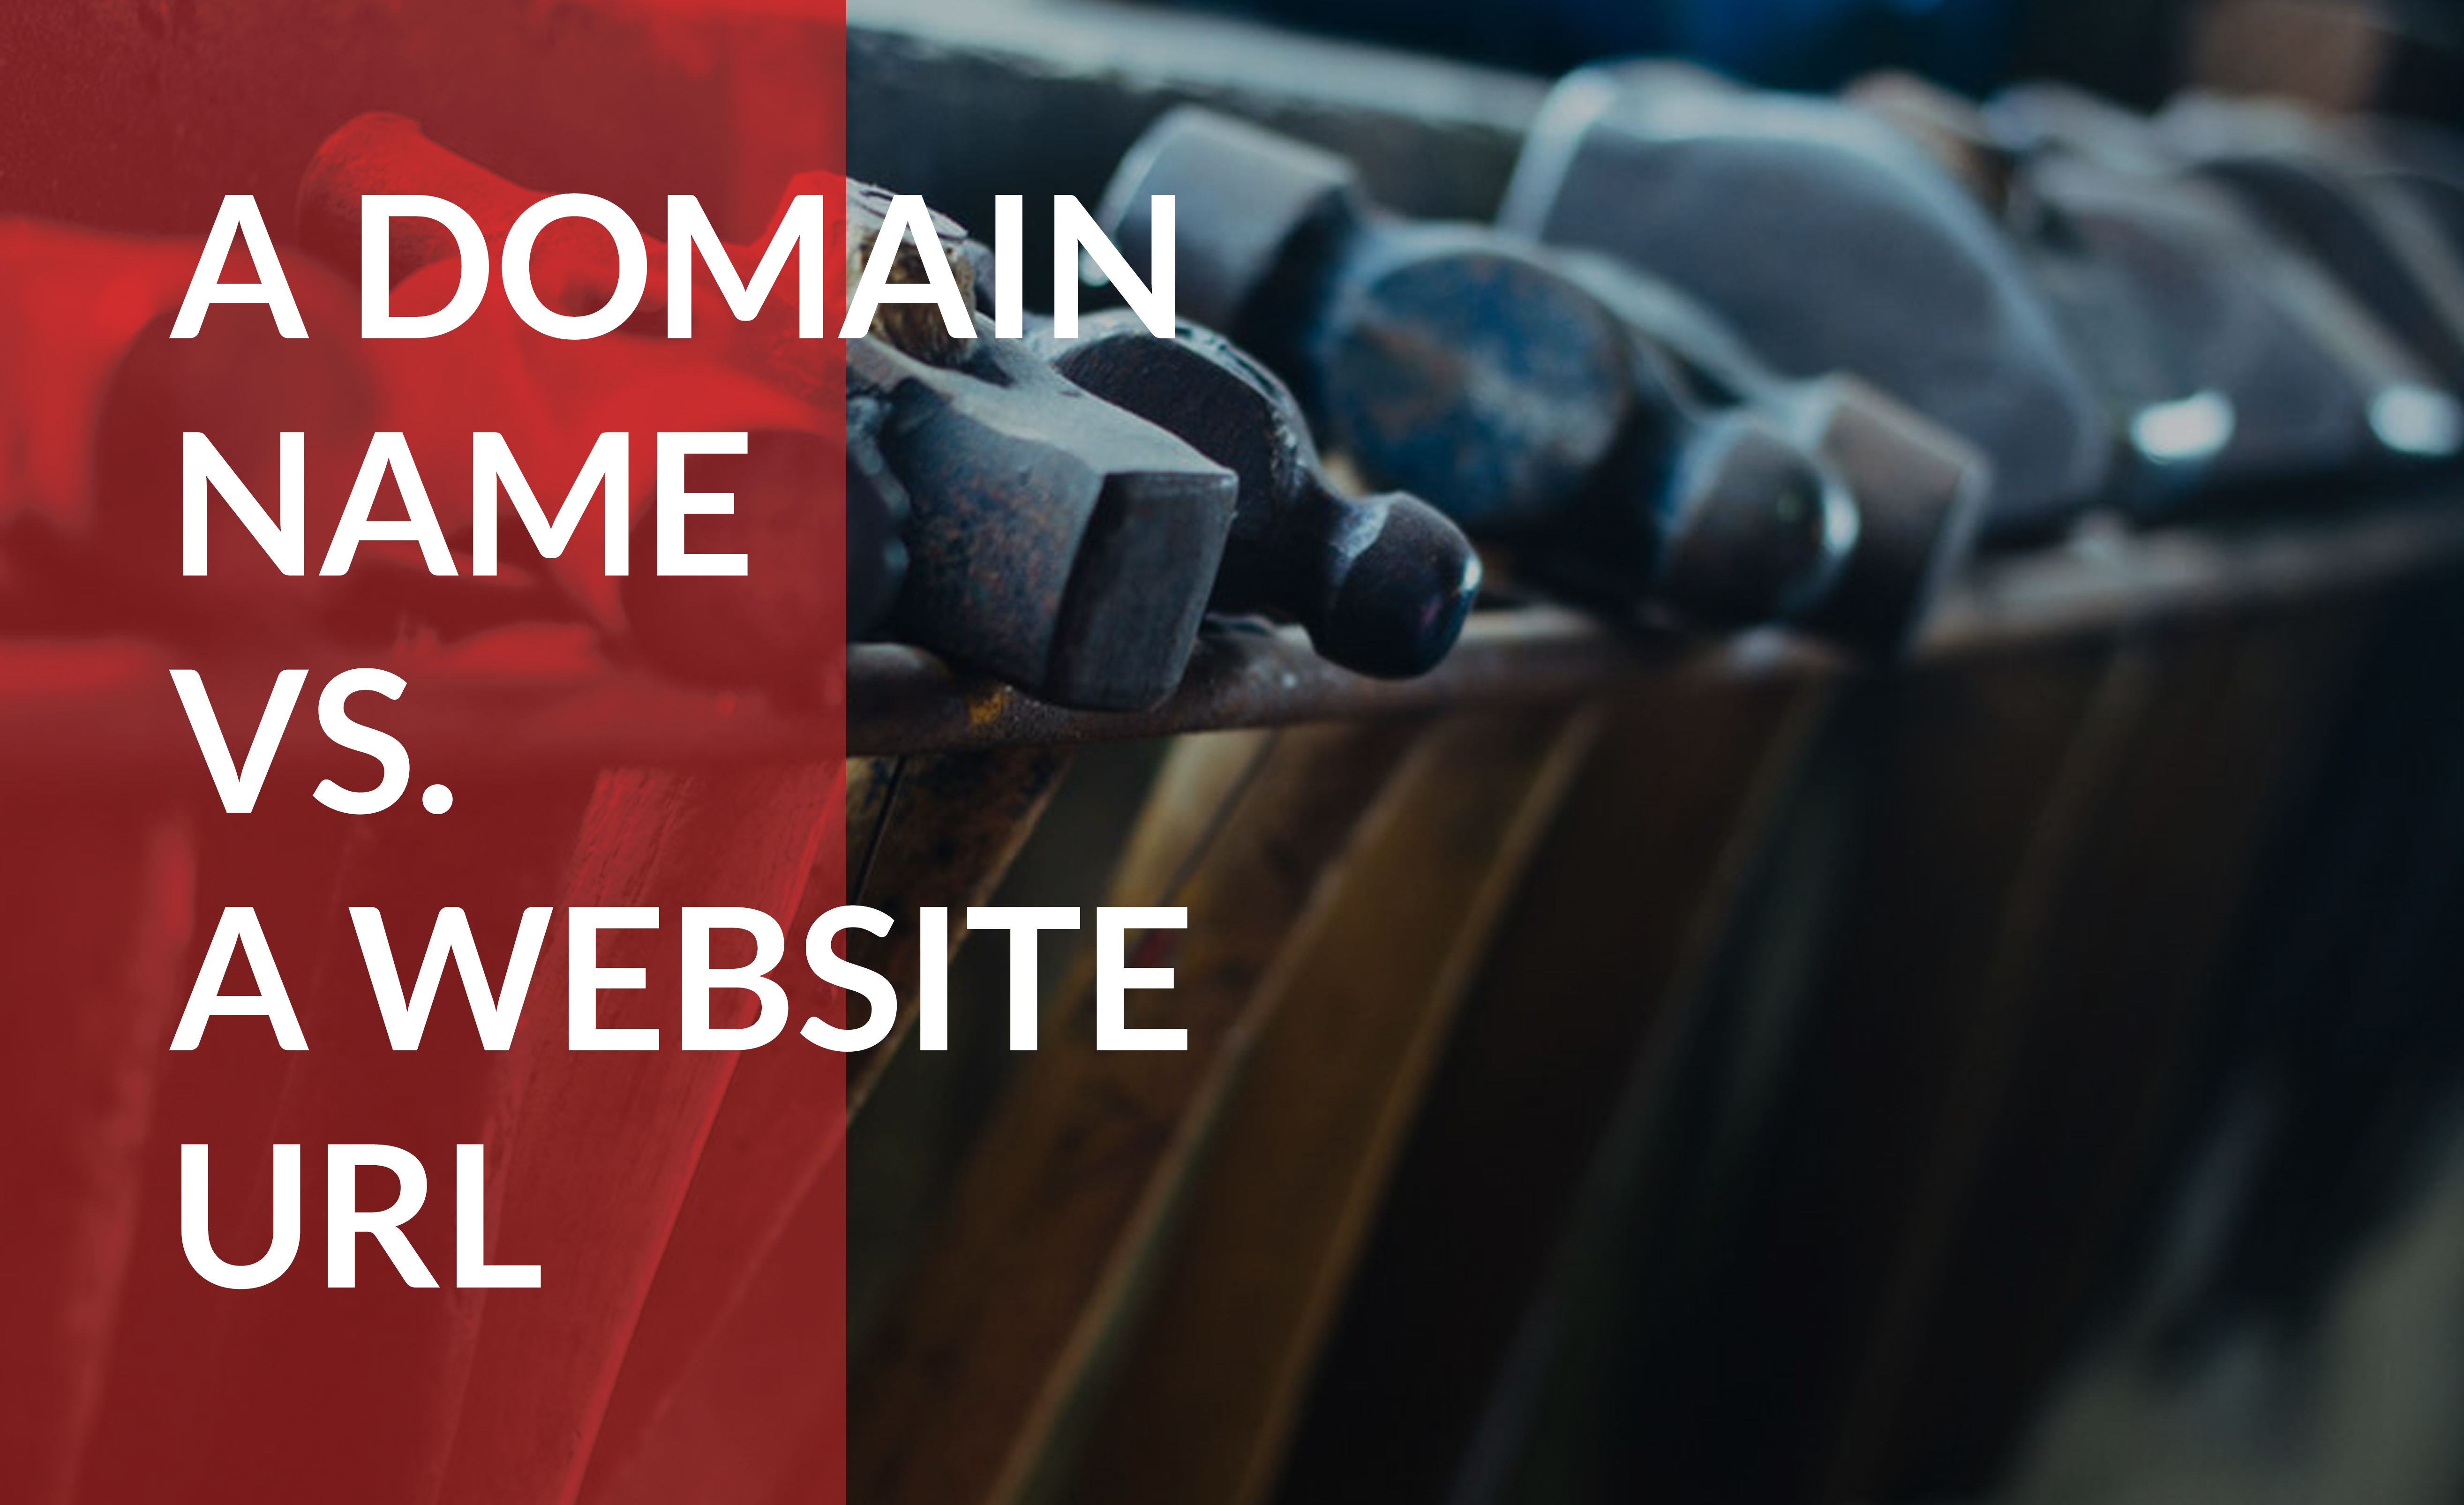 Learn the difference between a domain name and a website URL.